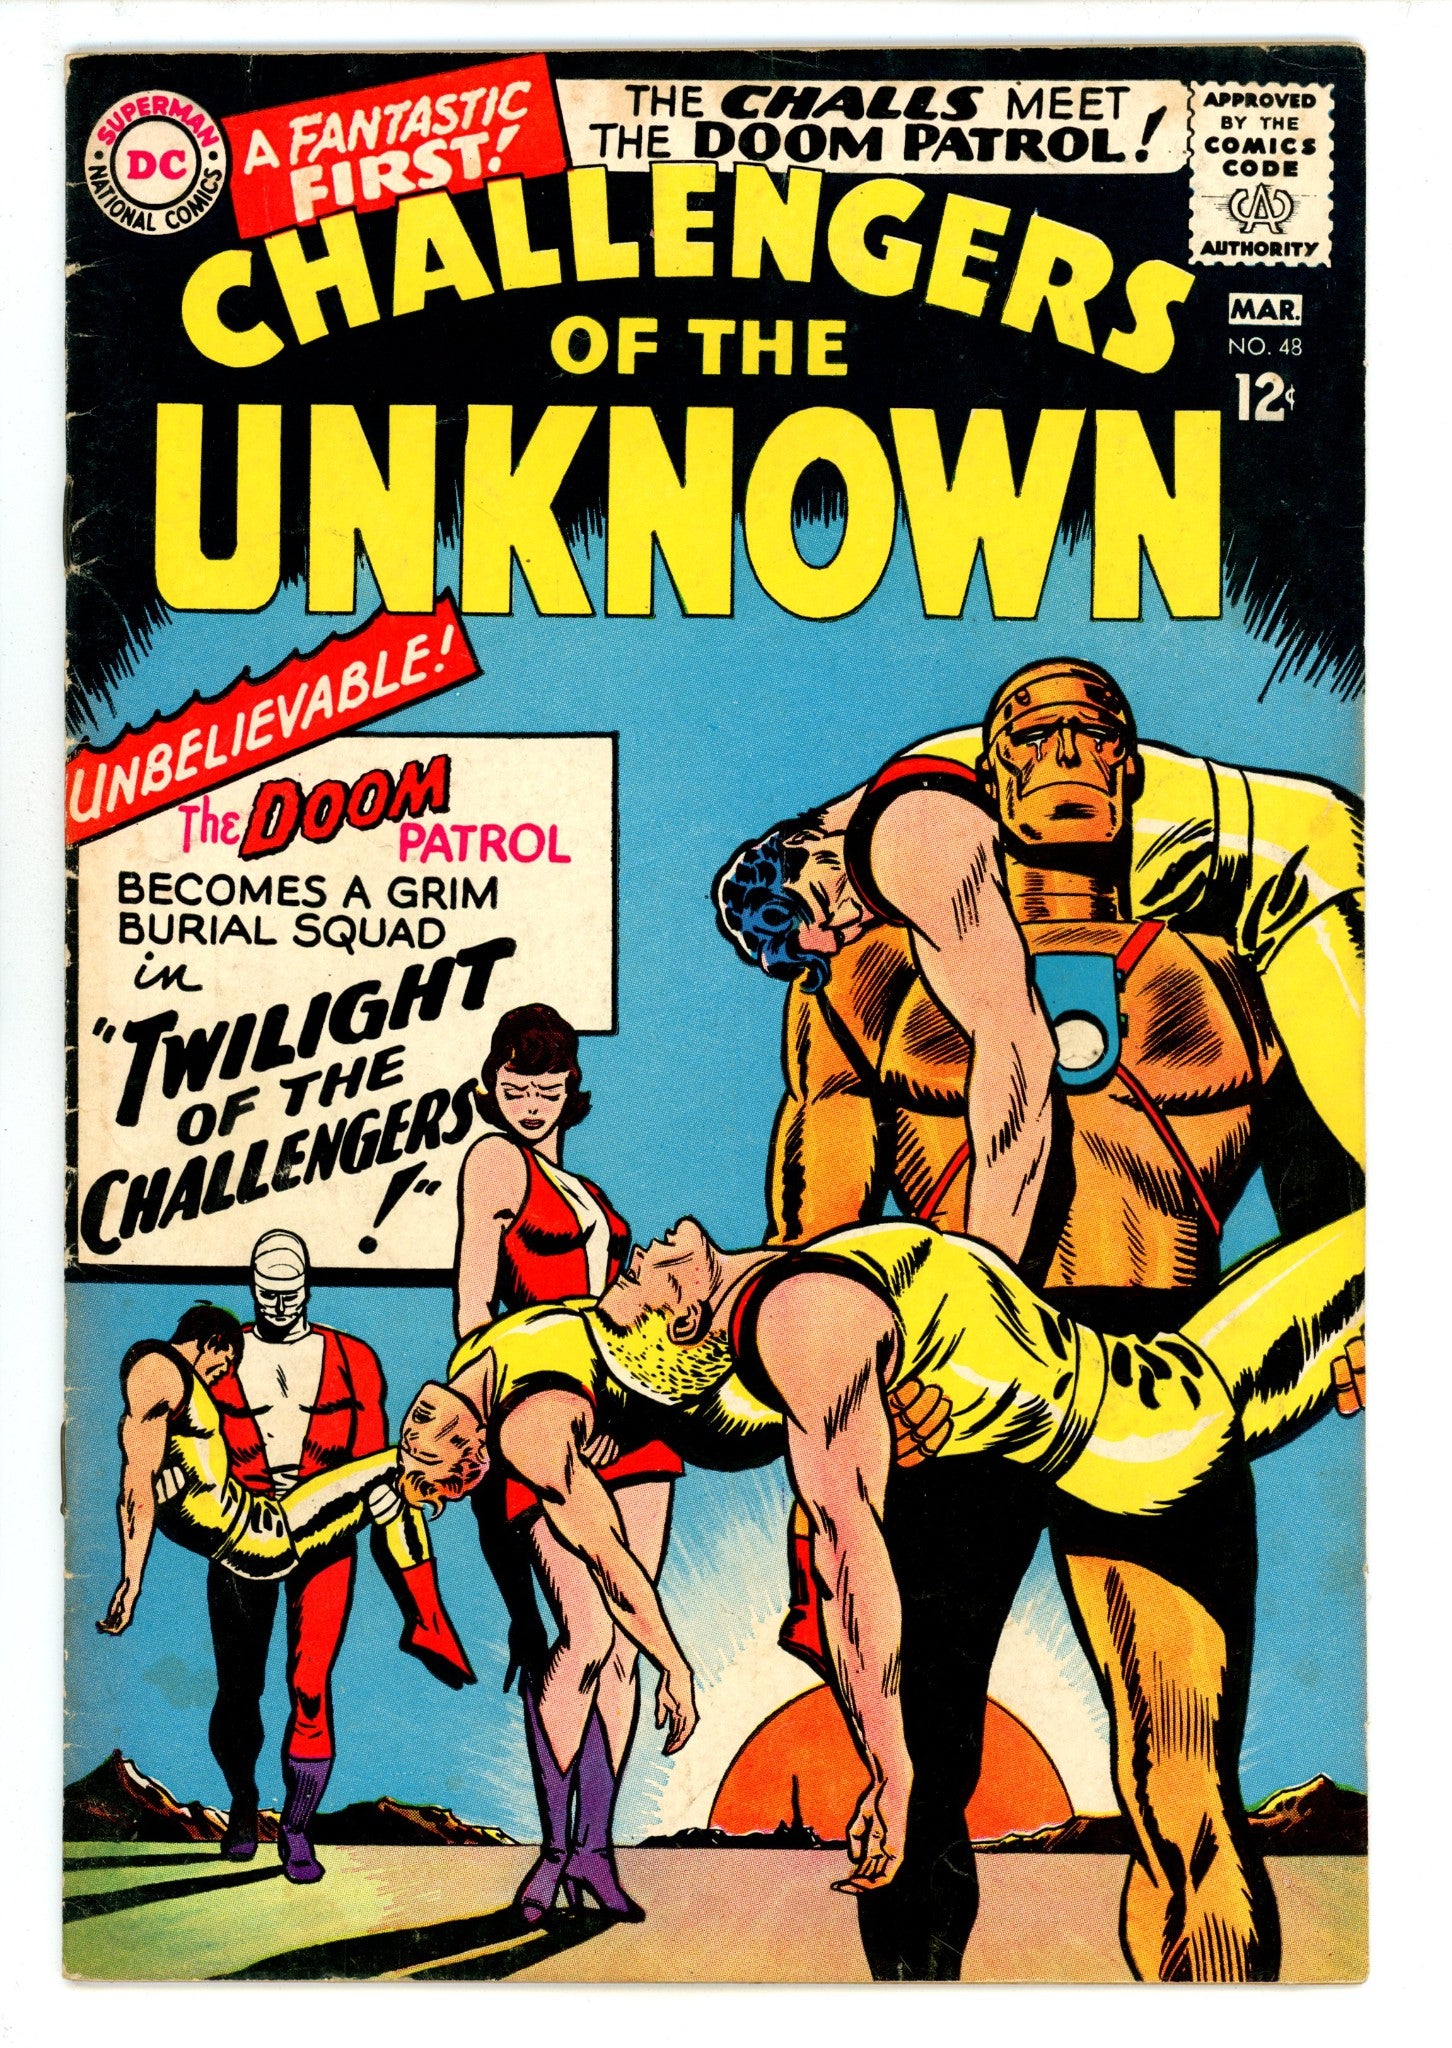 Challengers of the Unknown Vol 1 48 VG+ (4.5) (1966) 